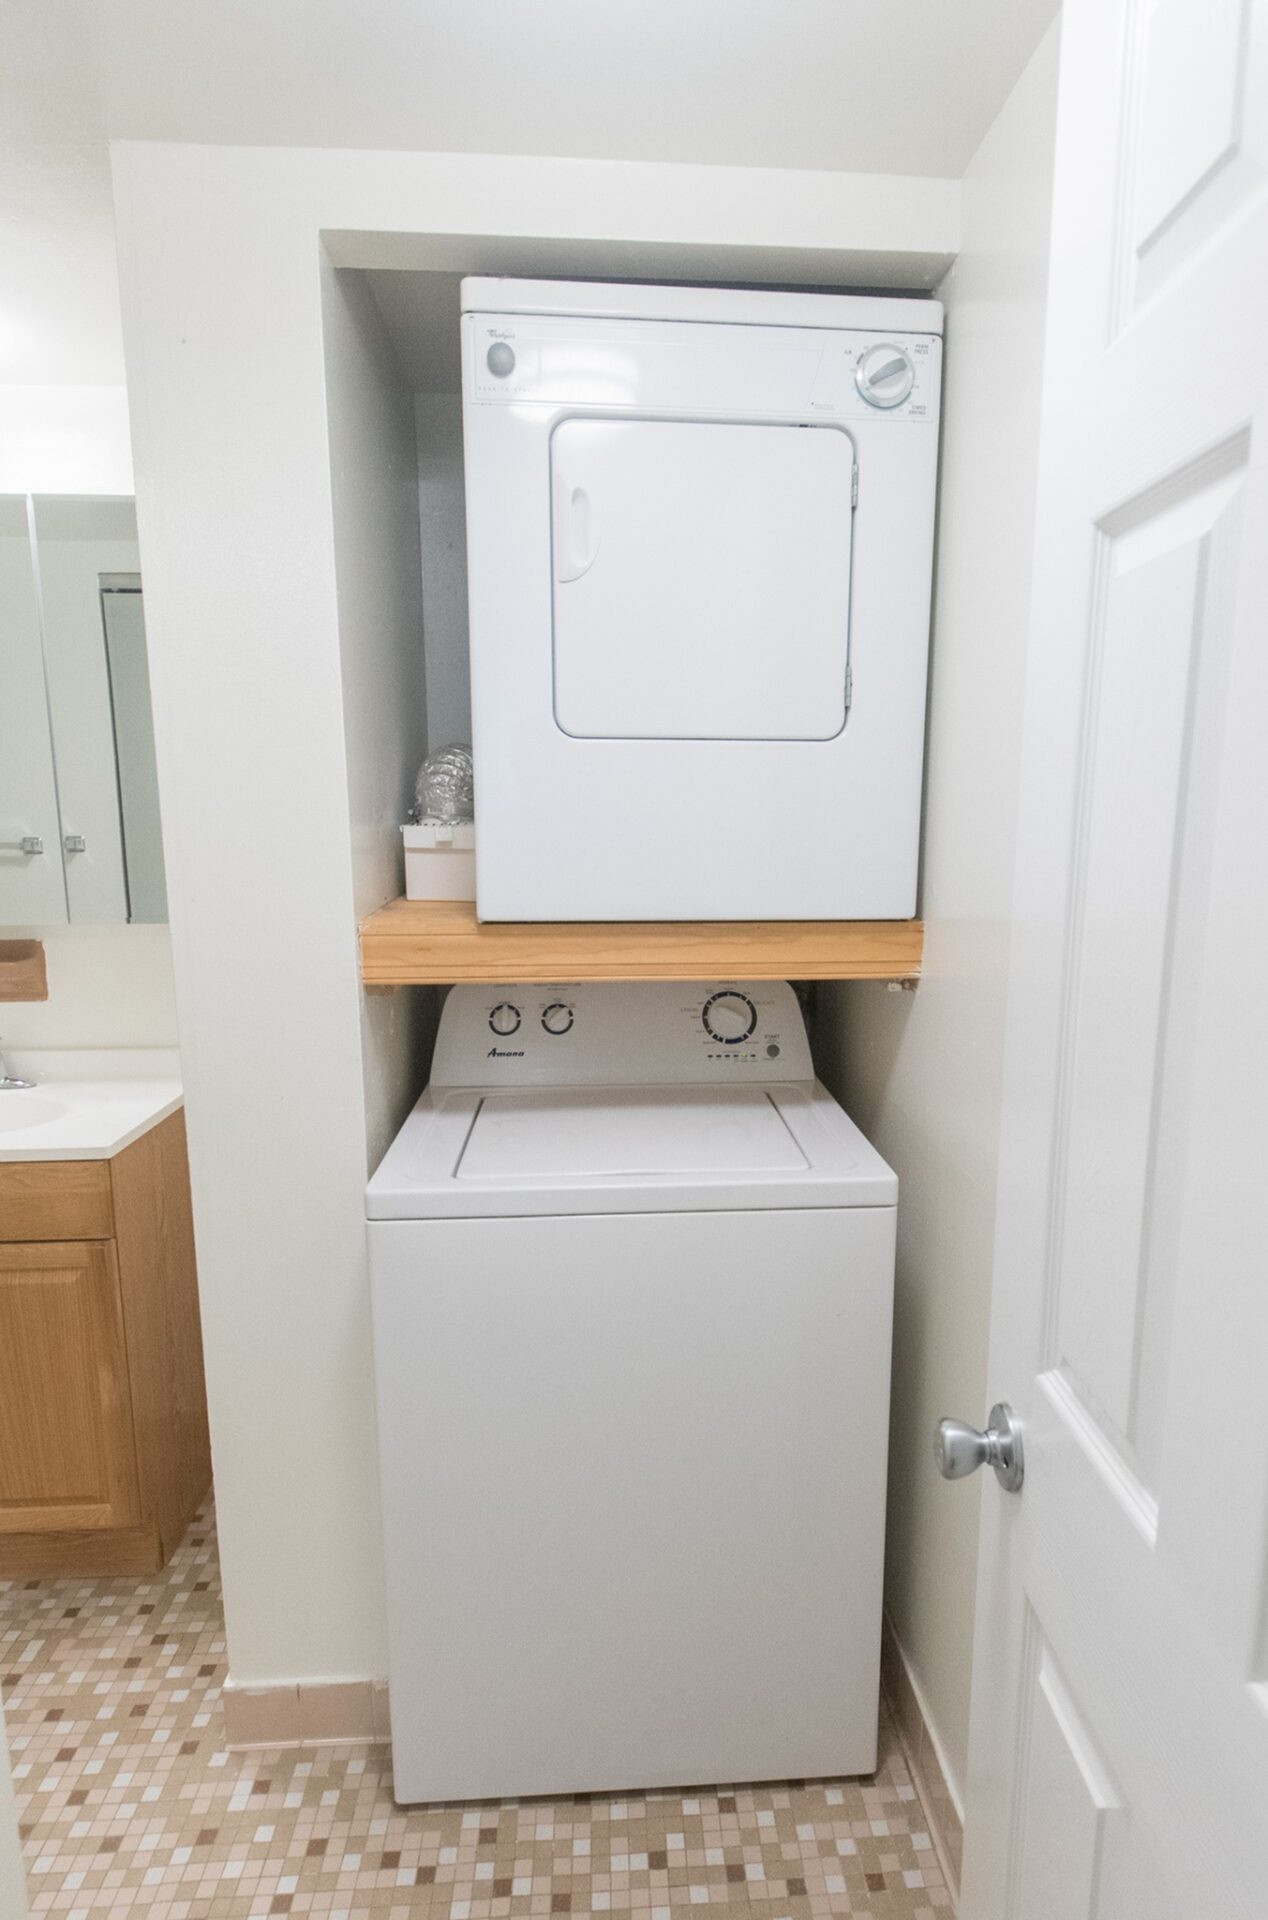 In-unit washer/dryer area of an apartment, fitted with a washer, a dryer, and tiled flooring